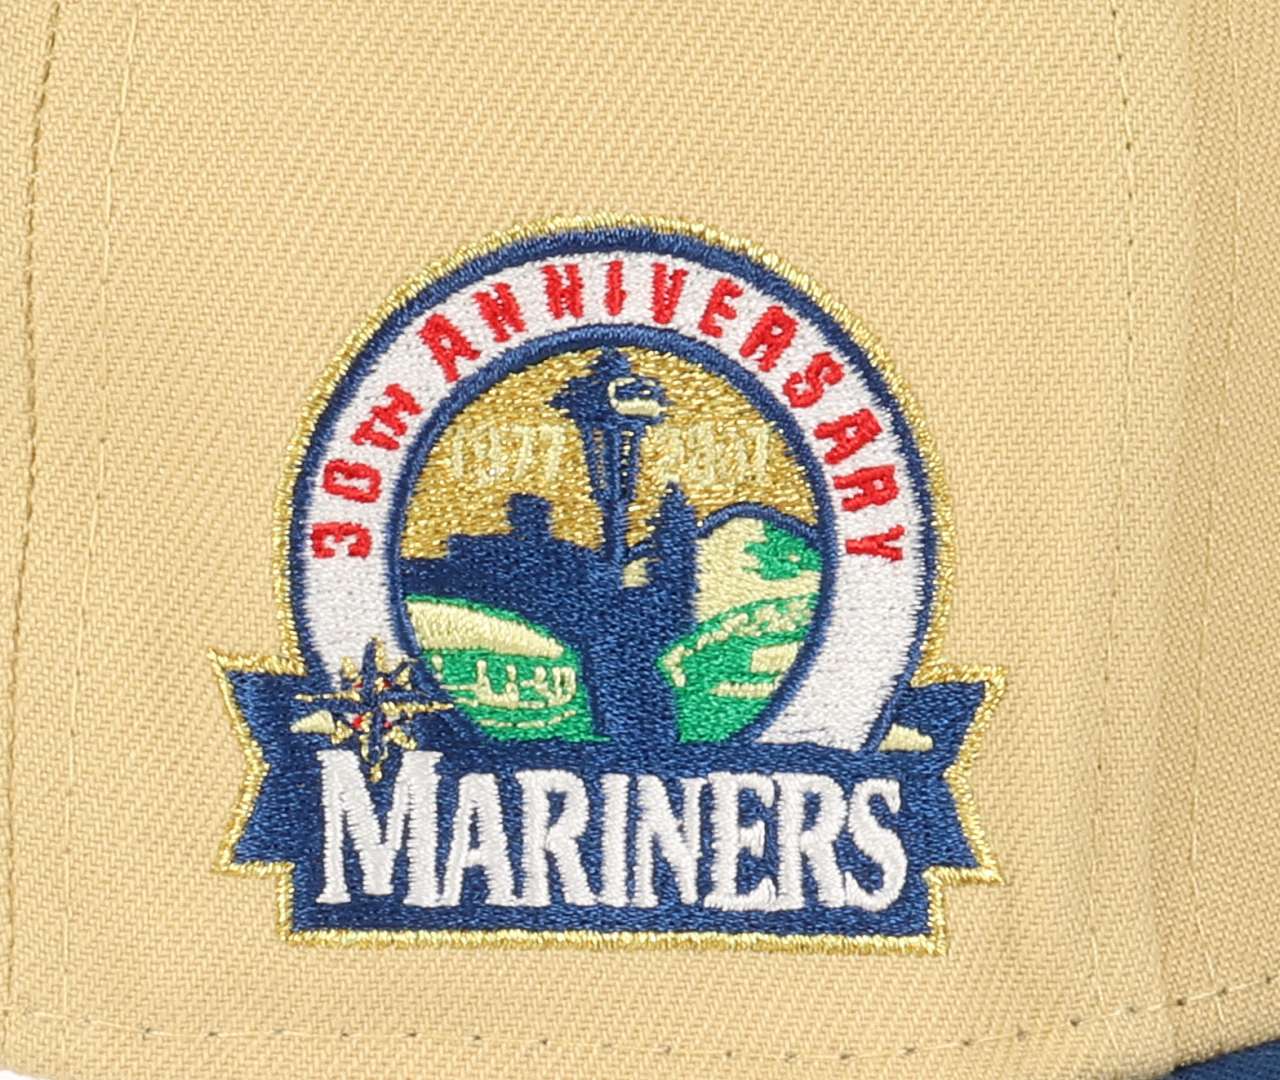 Seattle Mariners MLB Cooperstown 30th Anniversary 1977 - 2007  Vegas Gold Blue 59Fifty Basecap New Era